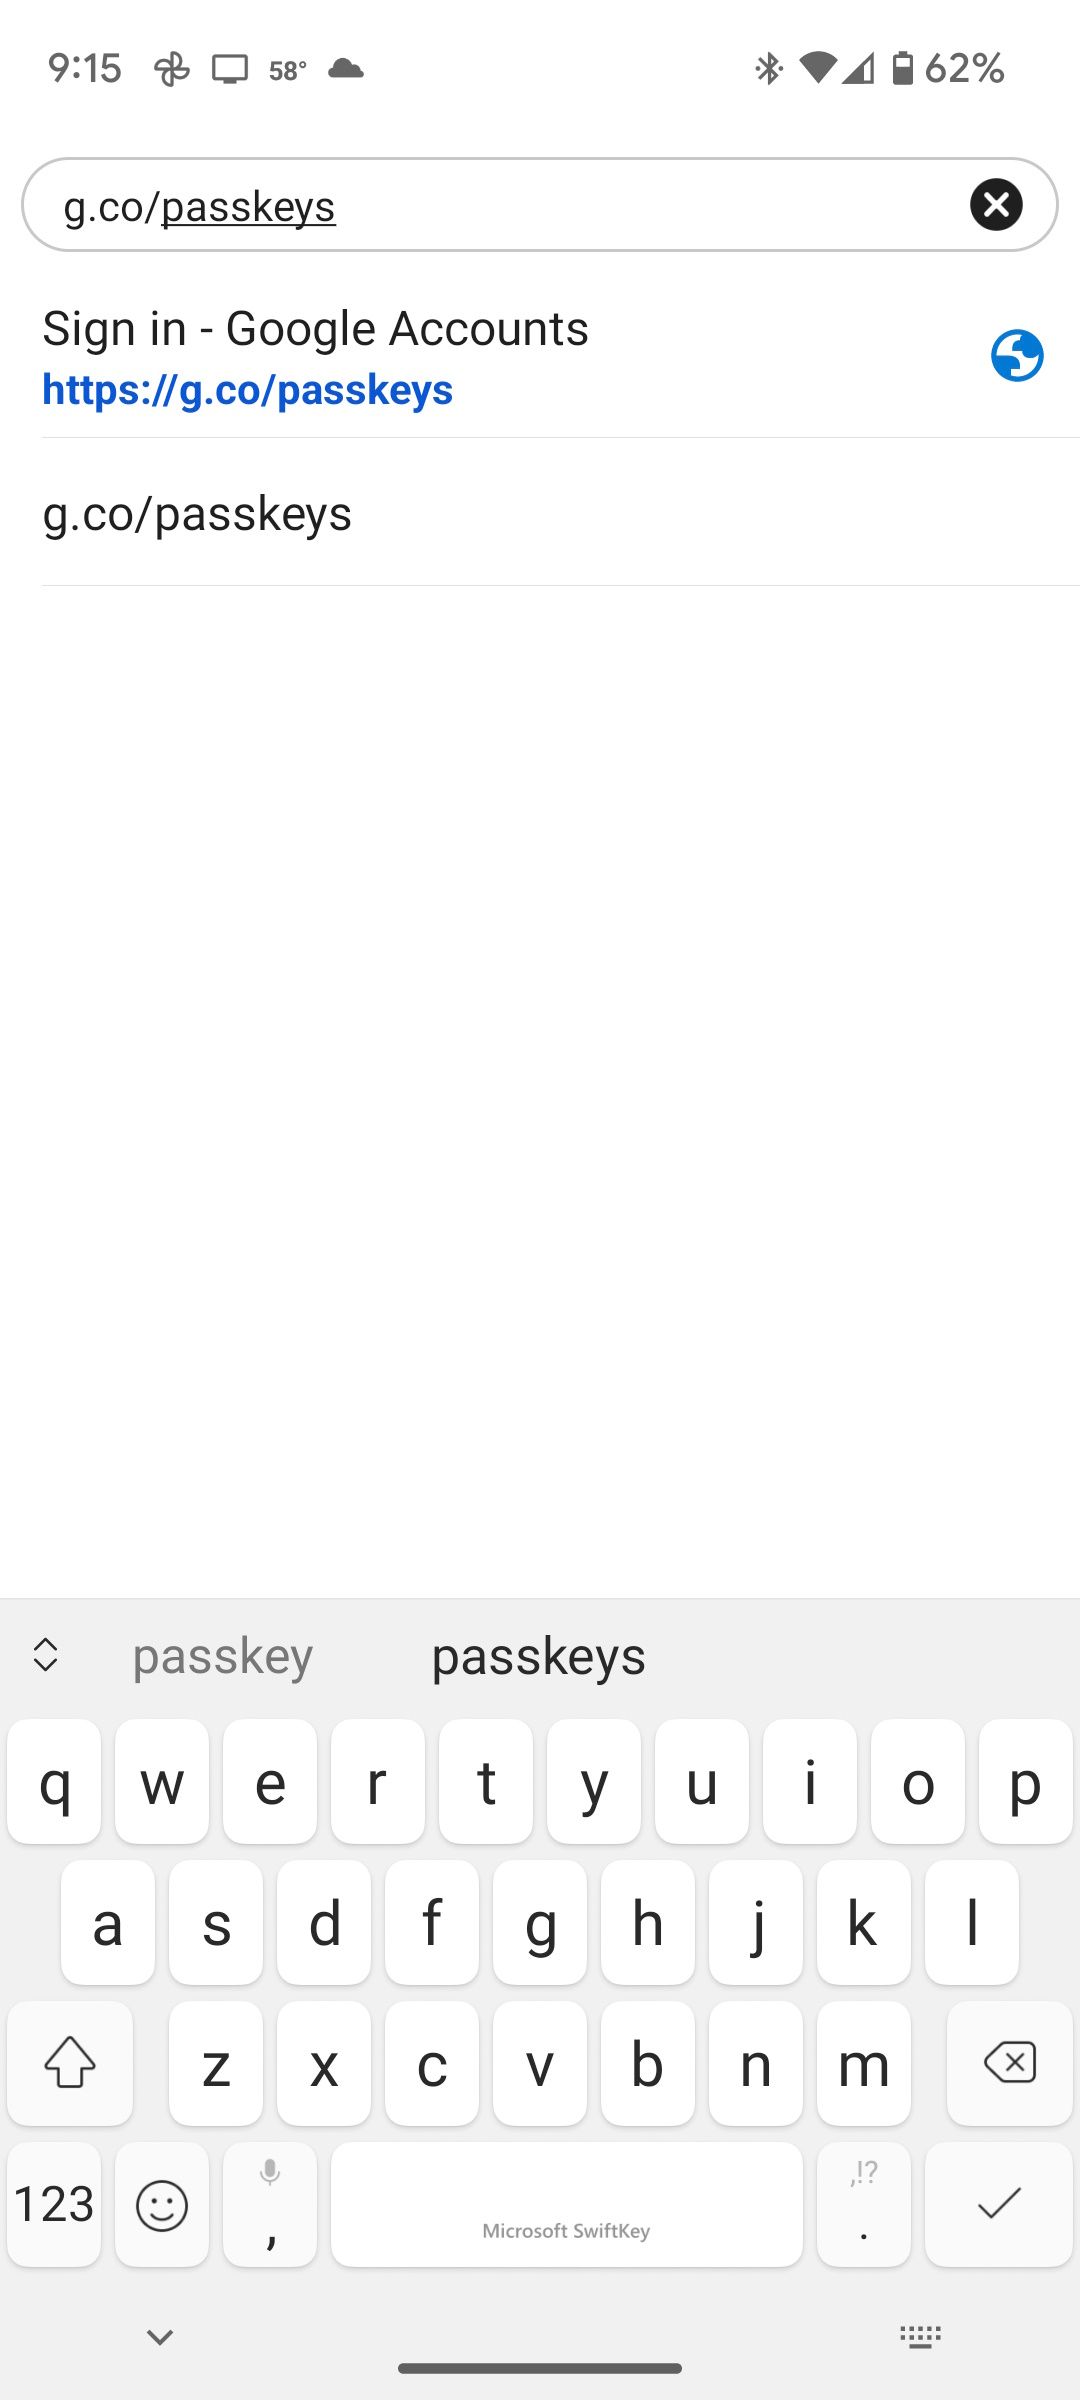 The URL to set up a passkey for a Google account